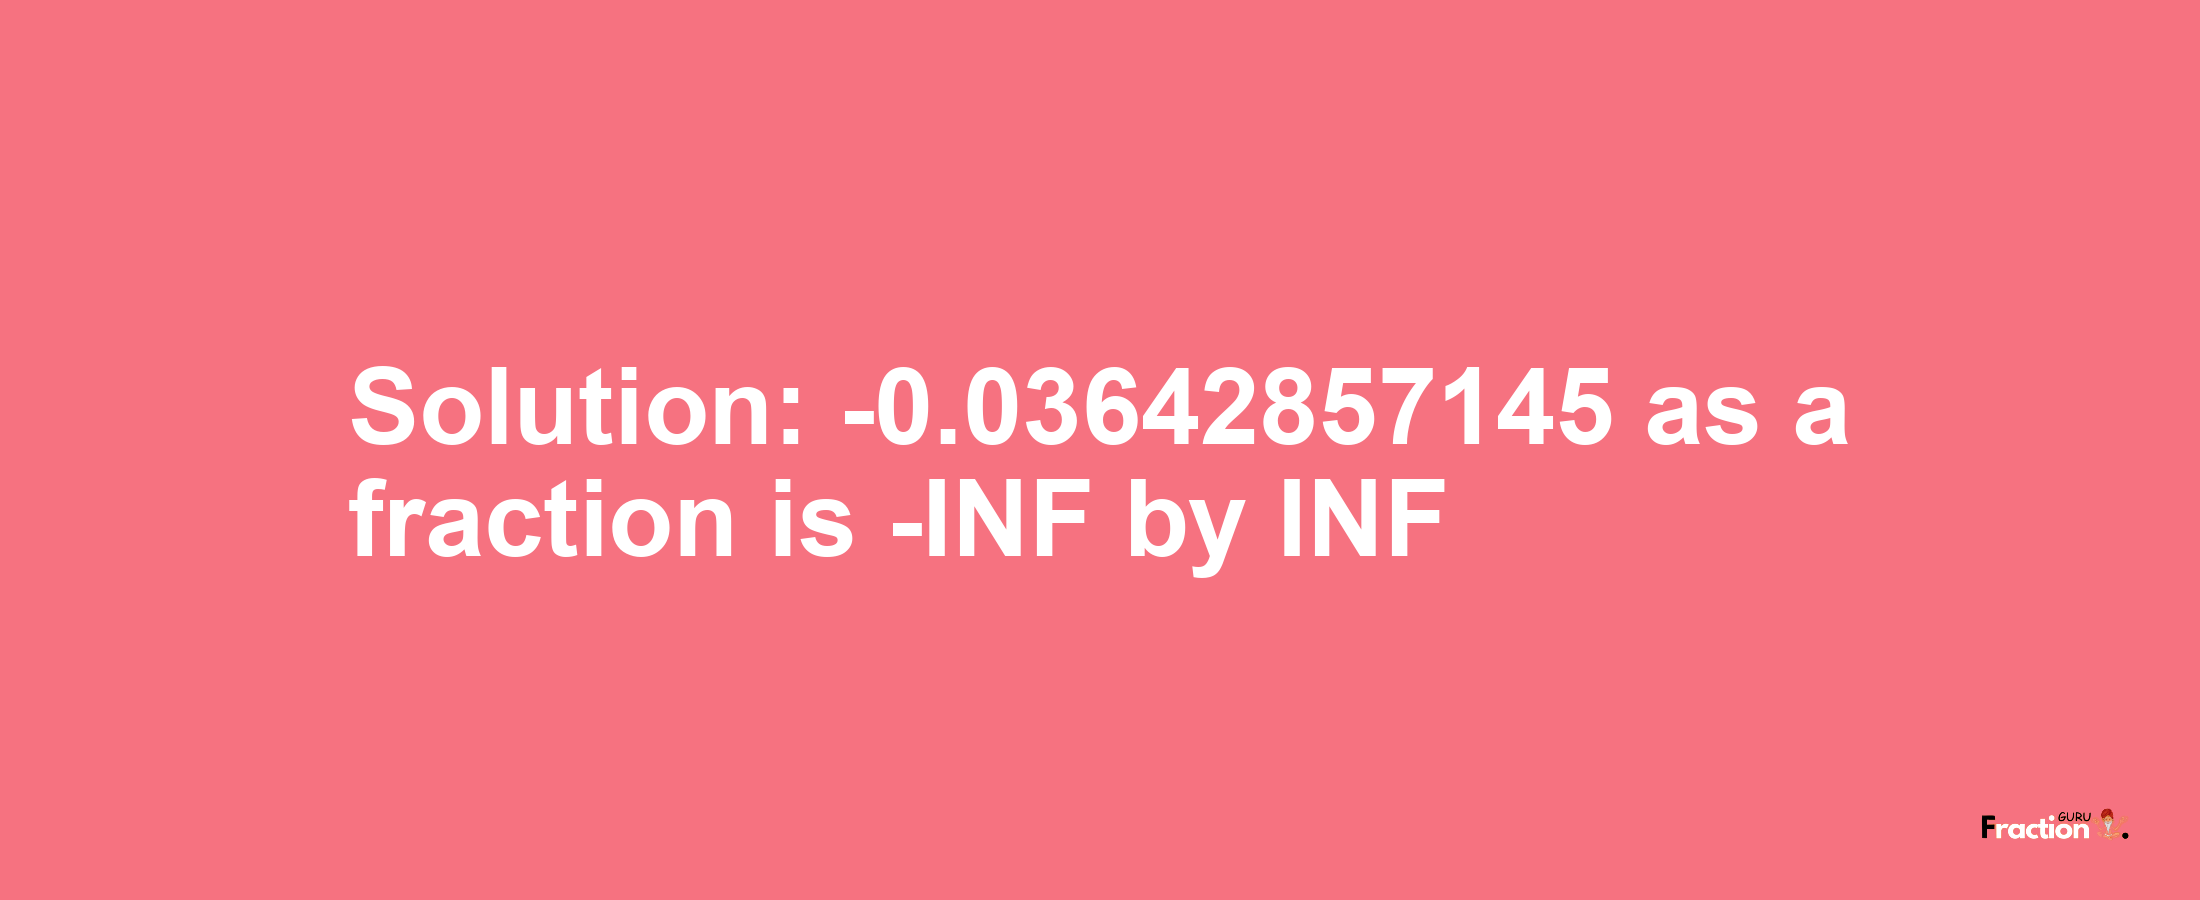 Solution:-0.03642857145 as a fraction is -INF/INF